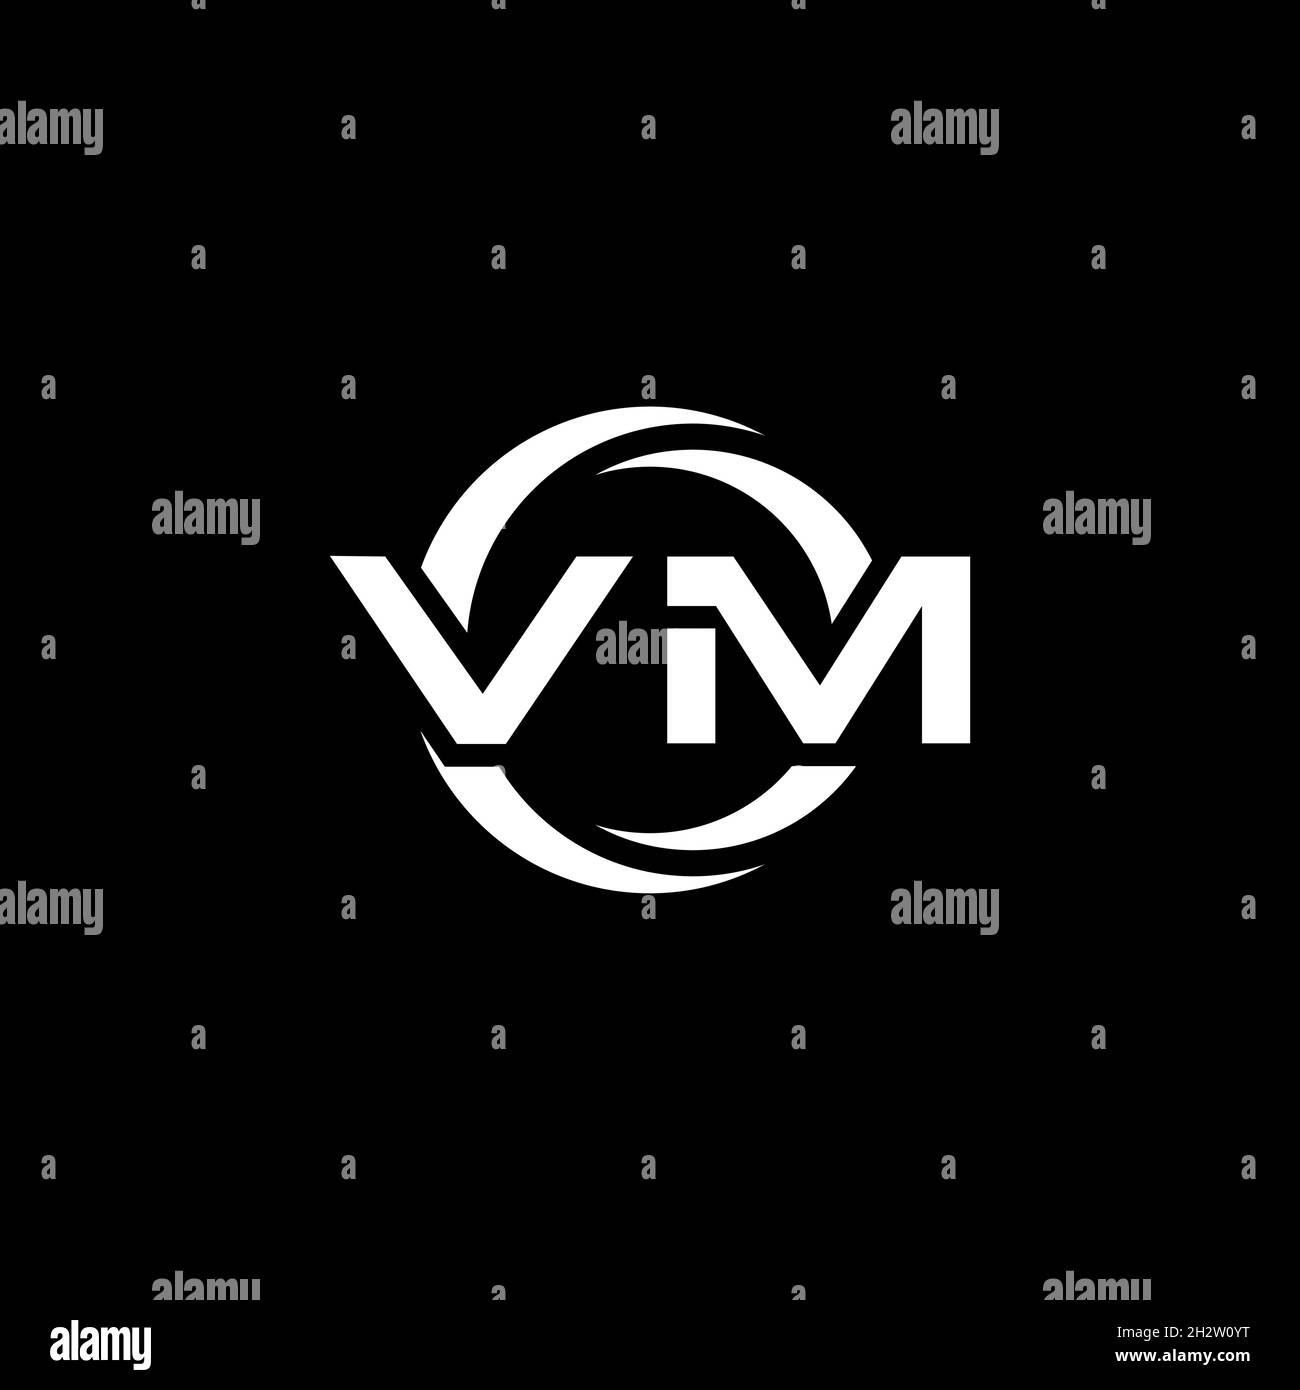 VM Monogram logo letter with simple shape and circle rounded design template isolated on black background Stock Vector